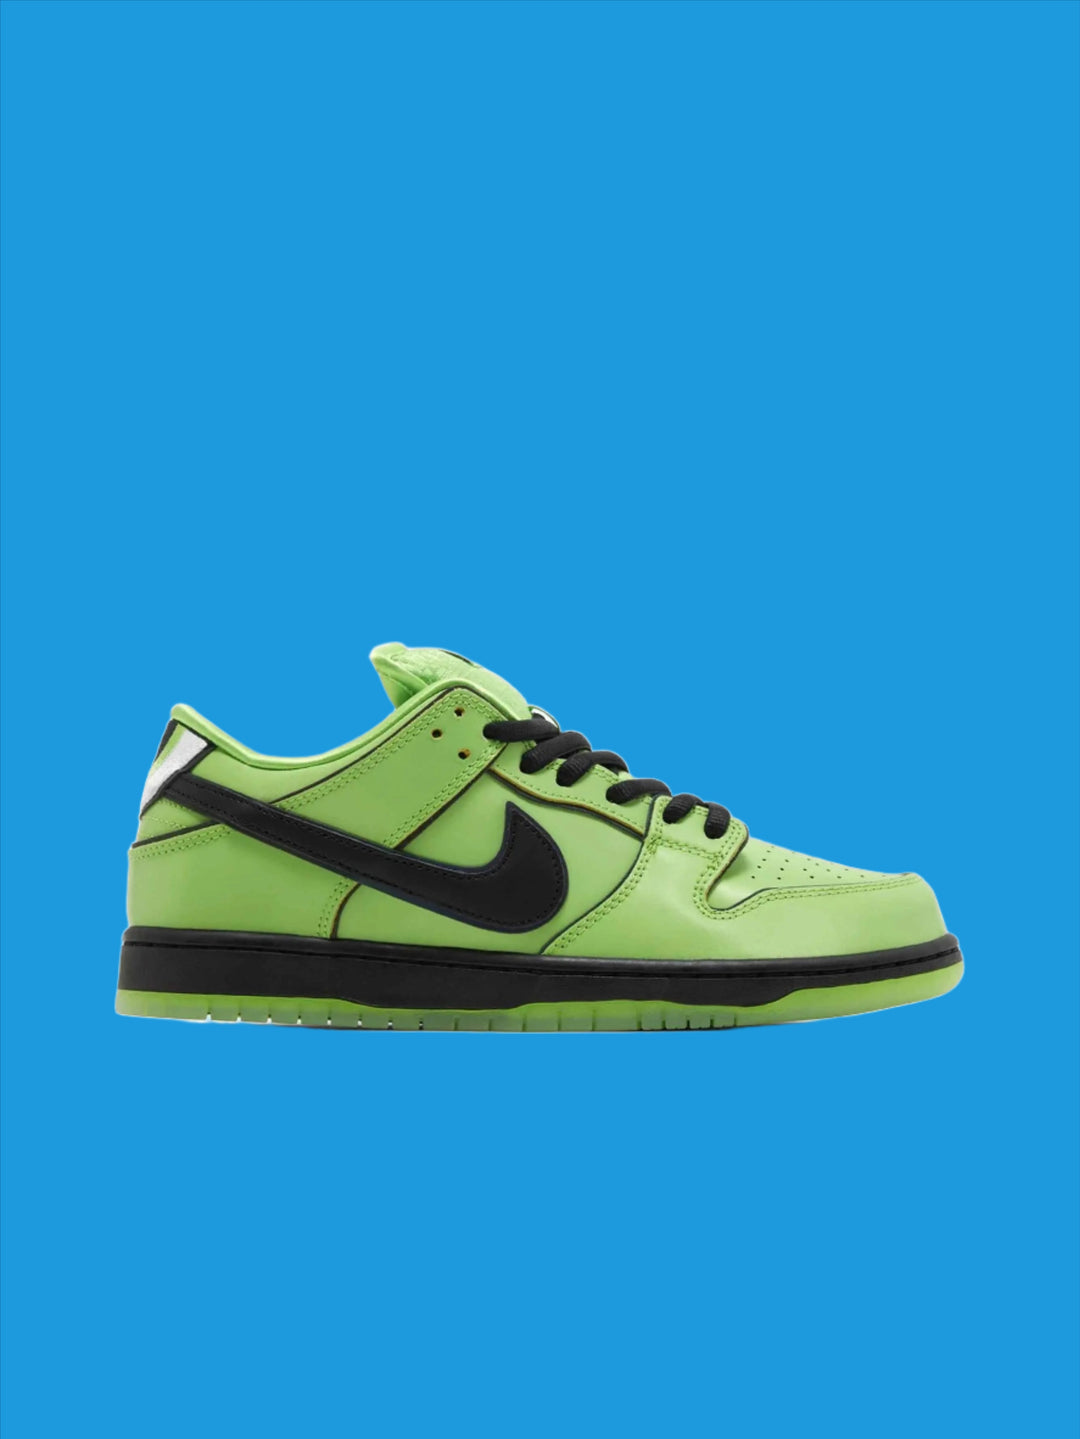 Nike SB Dunk Low The Powerpuff Girls Buttercup in Auckland, New Zealand - Shop name